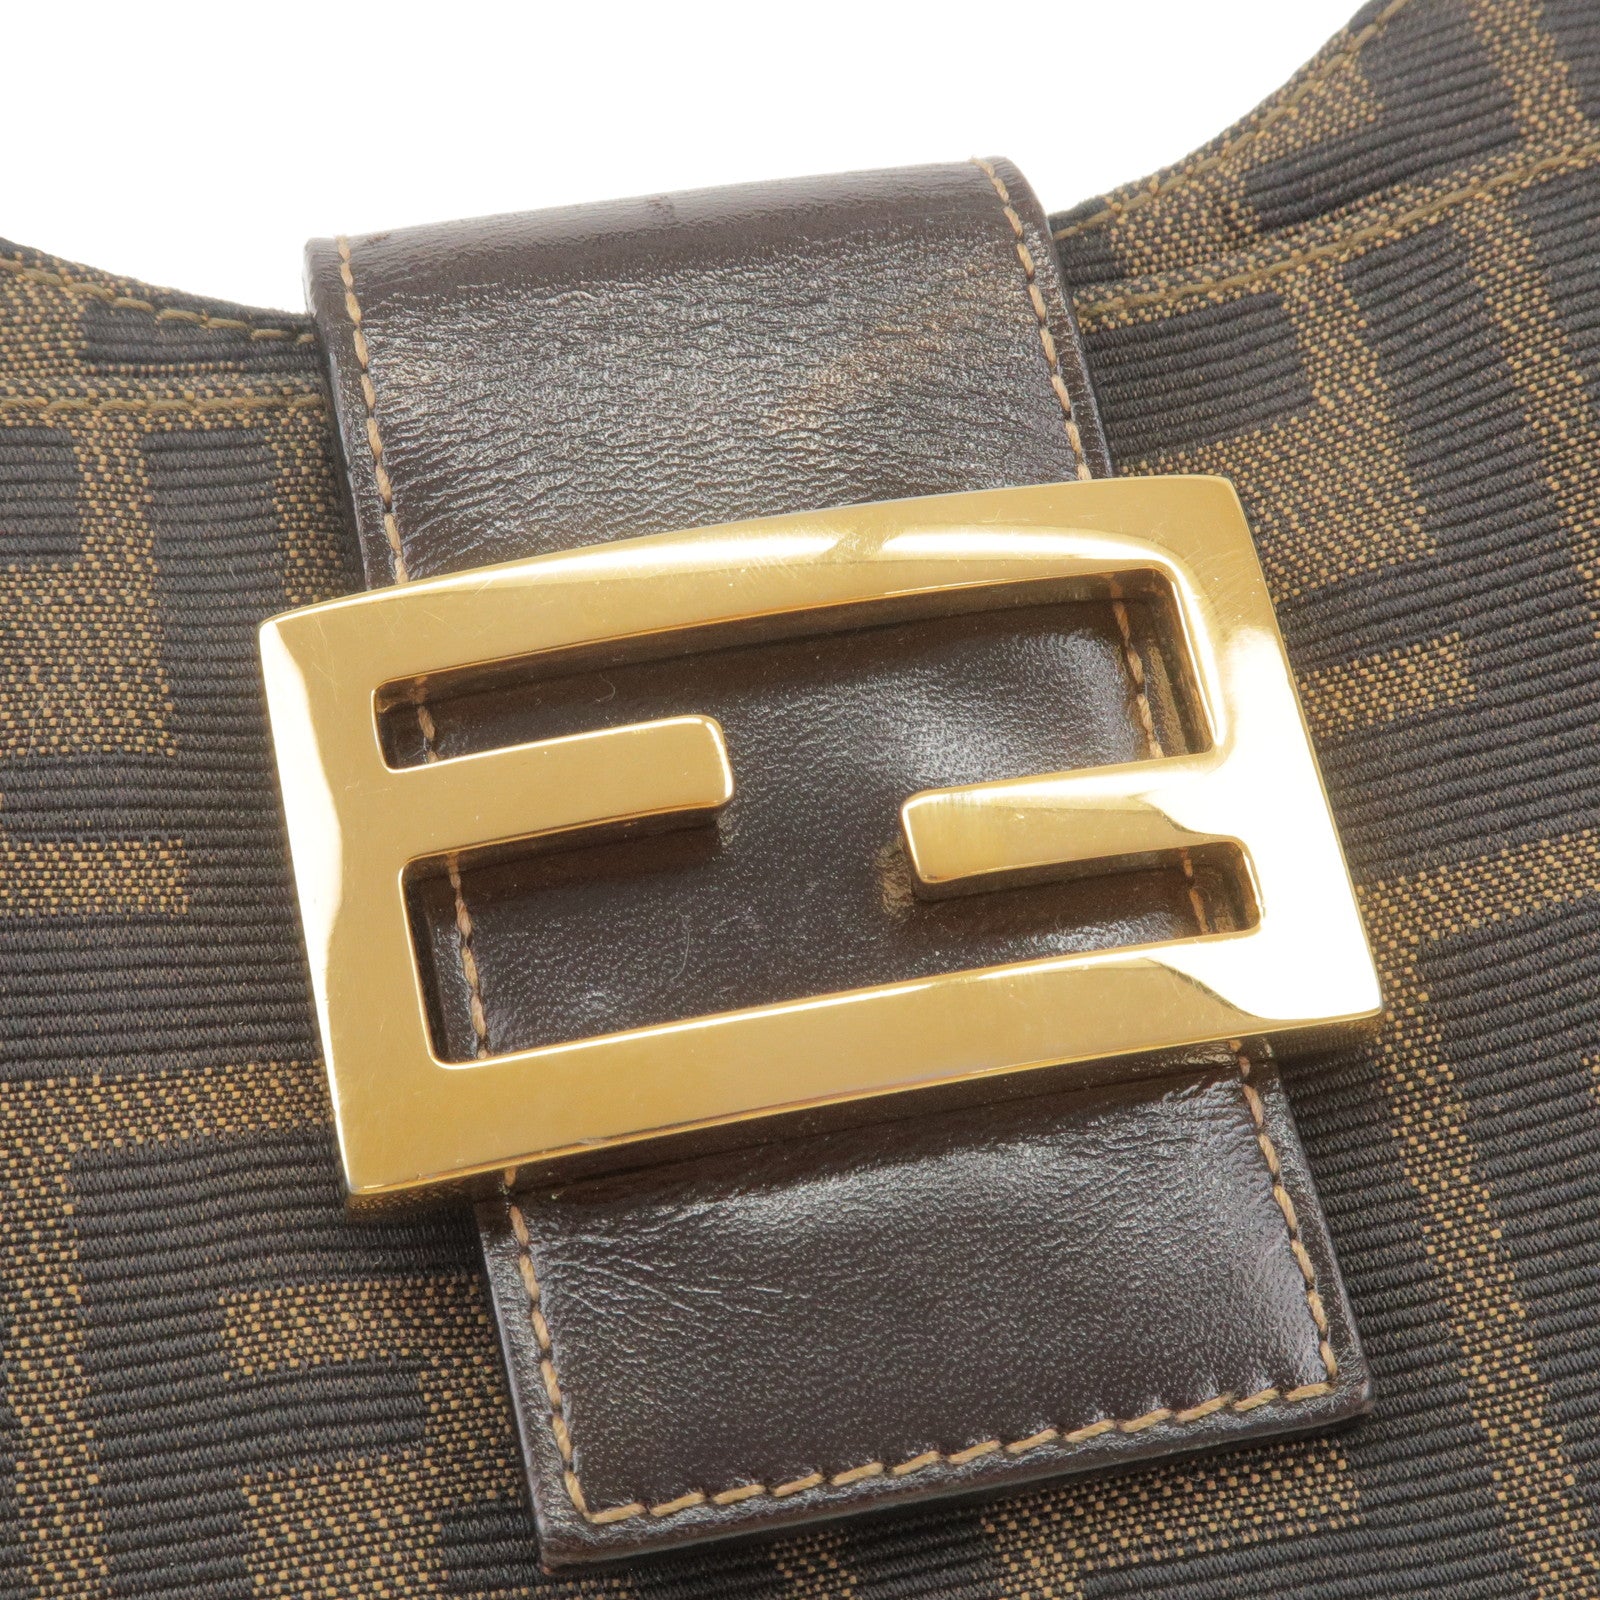 FENDI Roma Leather Wallet on Chain Crossbody Bag Brown